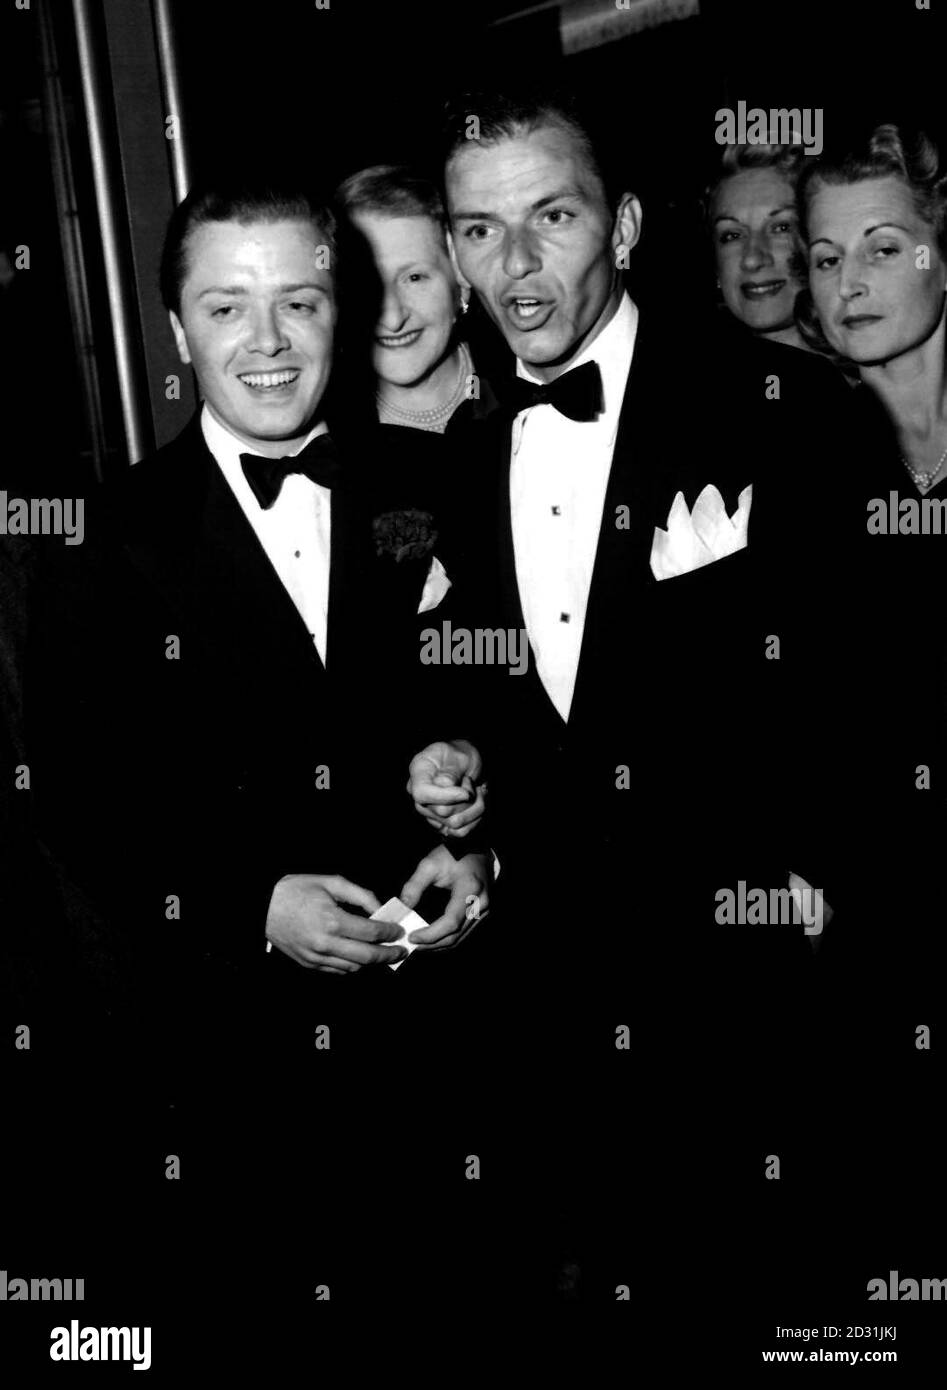 1950: While British film star Richard Attenborough (l) looks amused, American swoon-crooner Frank Sinatra seems in the midst of one of those devastating numbers of his. The occasion is the first night of Noel Coward's musical play 'Ace of Clubs' at the Cambridge Theatre, London. Stock Photo